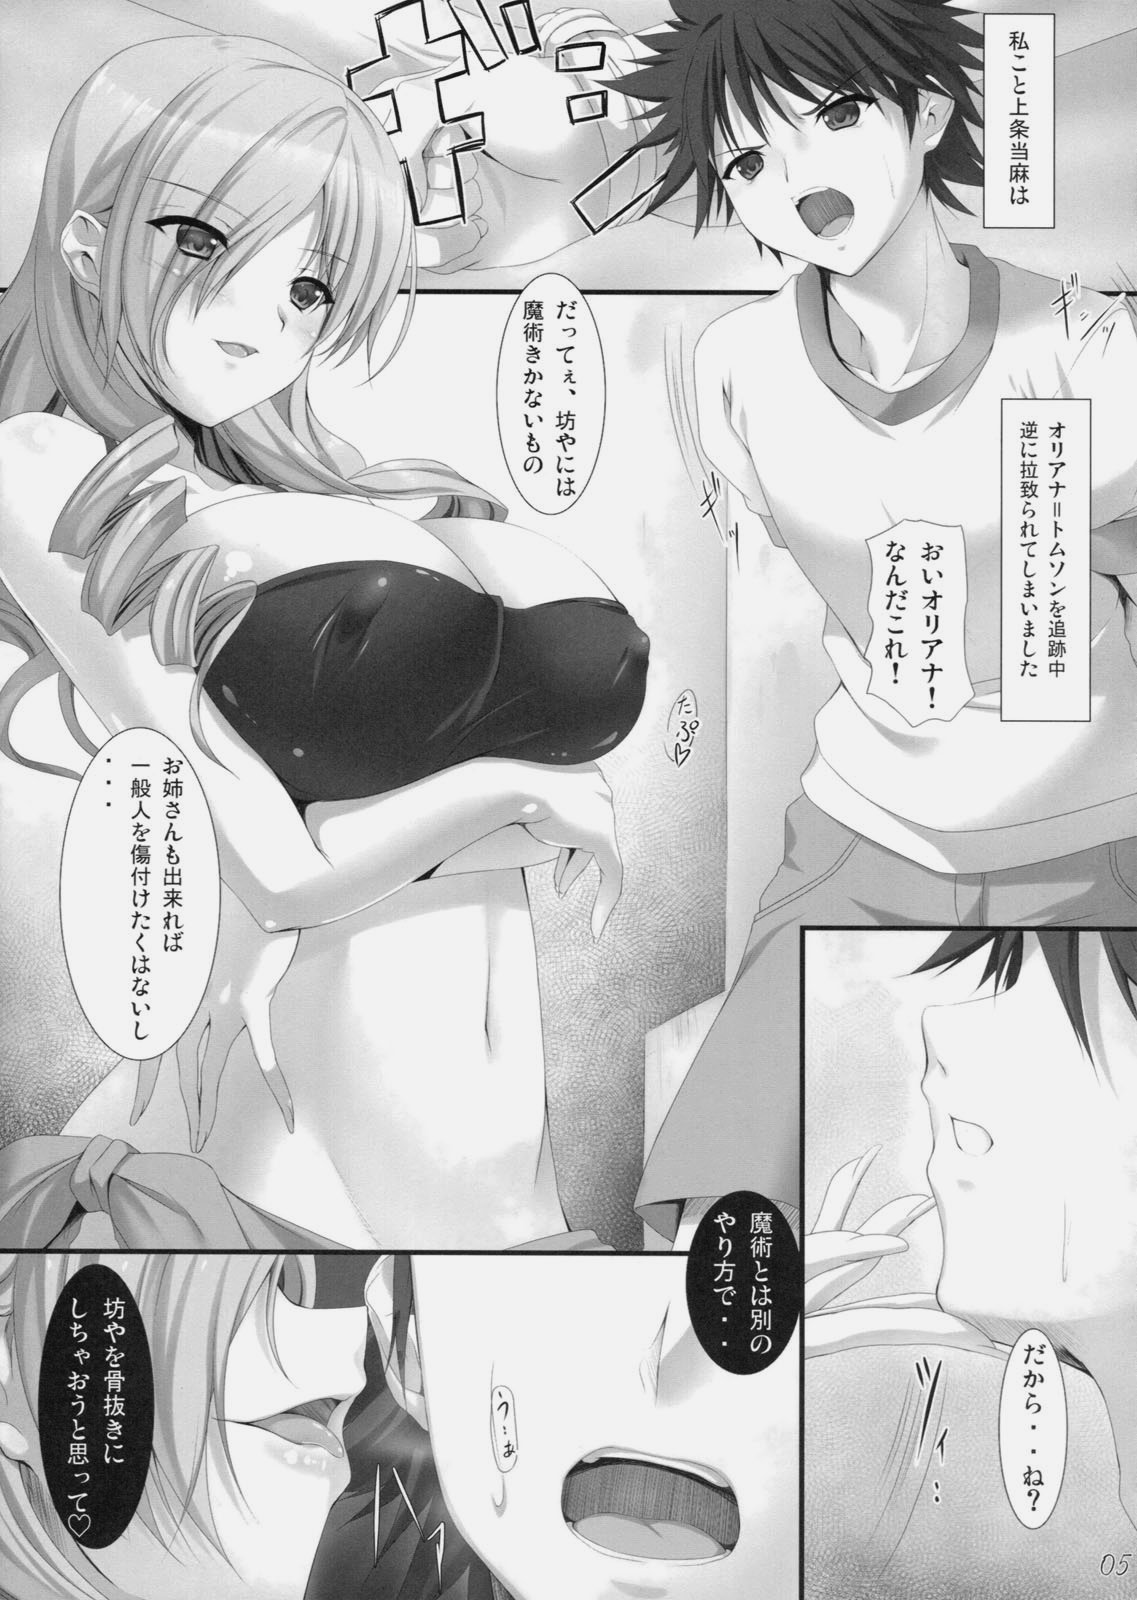 (COMIC1☆5) [In The Sky (Nakano Sora)] Oneesan syndrome (Toaru Majutsu no Index) (COMIC1☆5) [In The Sky (中乃空)] おねぇさんsyndrome (とある魔術の禁書目録)